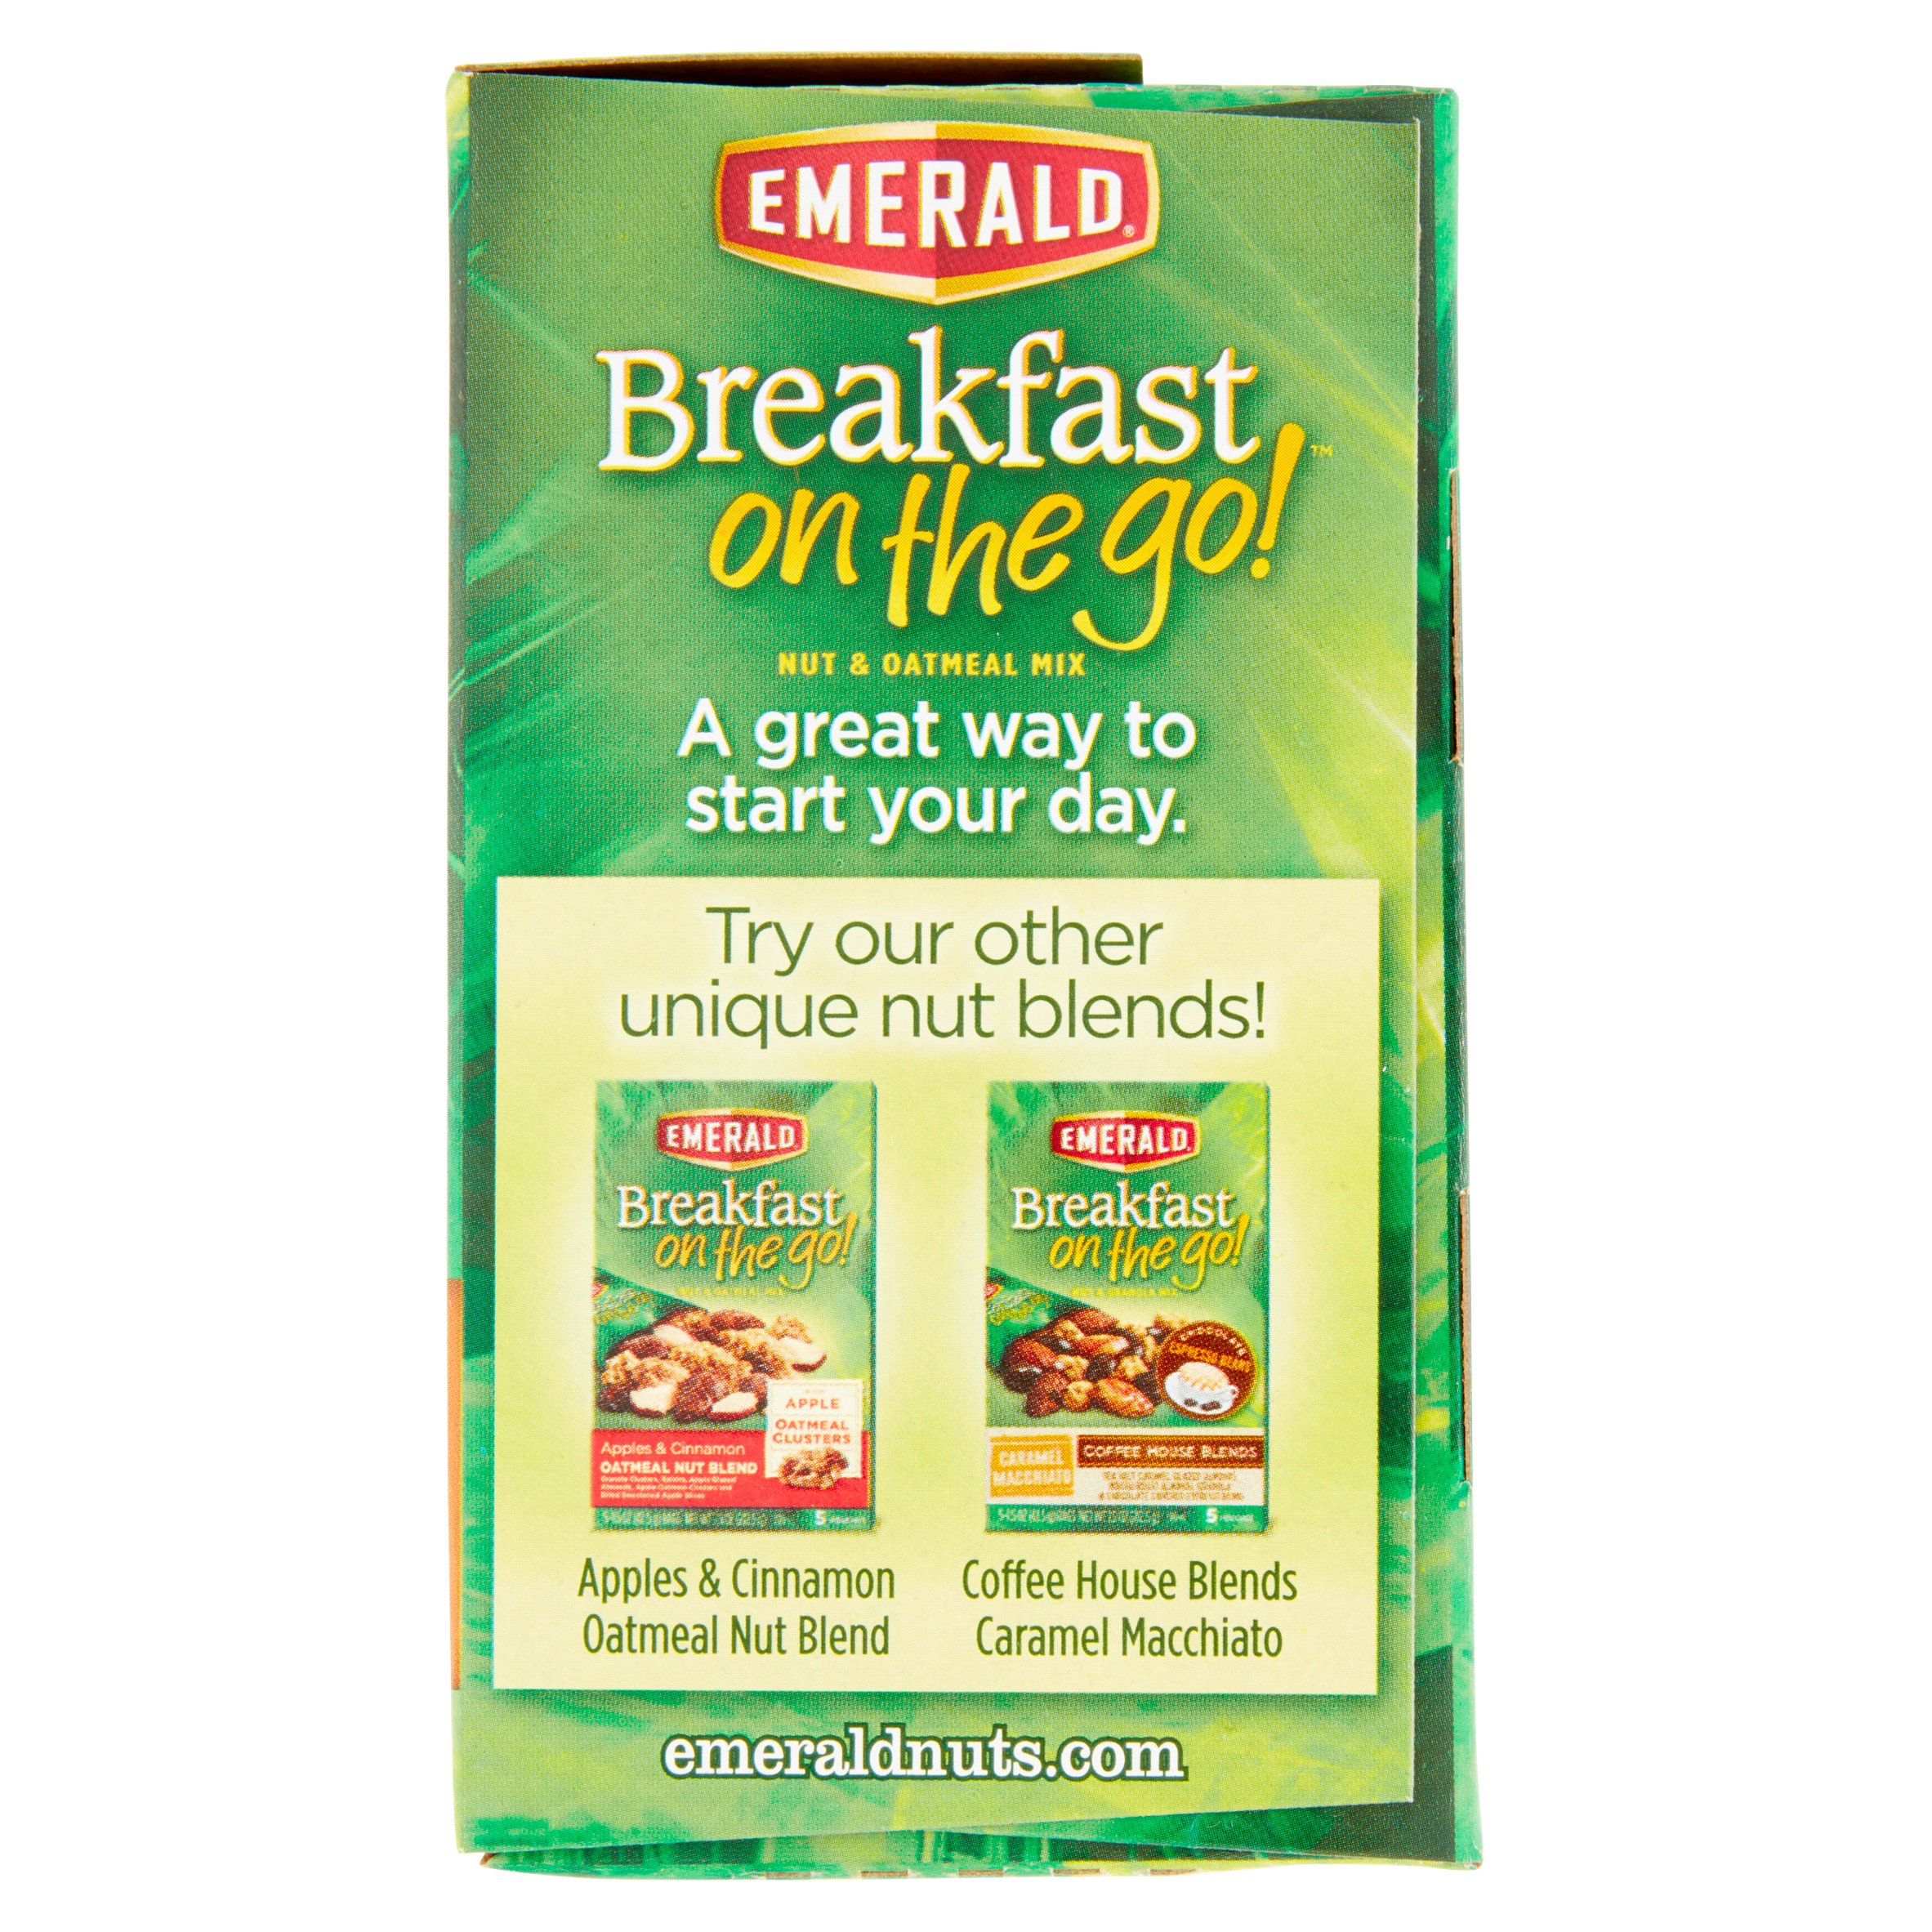 Emerald Breakfast On The Go Nut & Oatmeal Mix, Maple & Brown Sugar, 1.5 Oz, 5 Ct - image 5 of 5